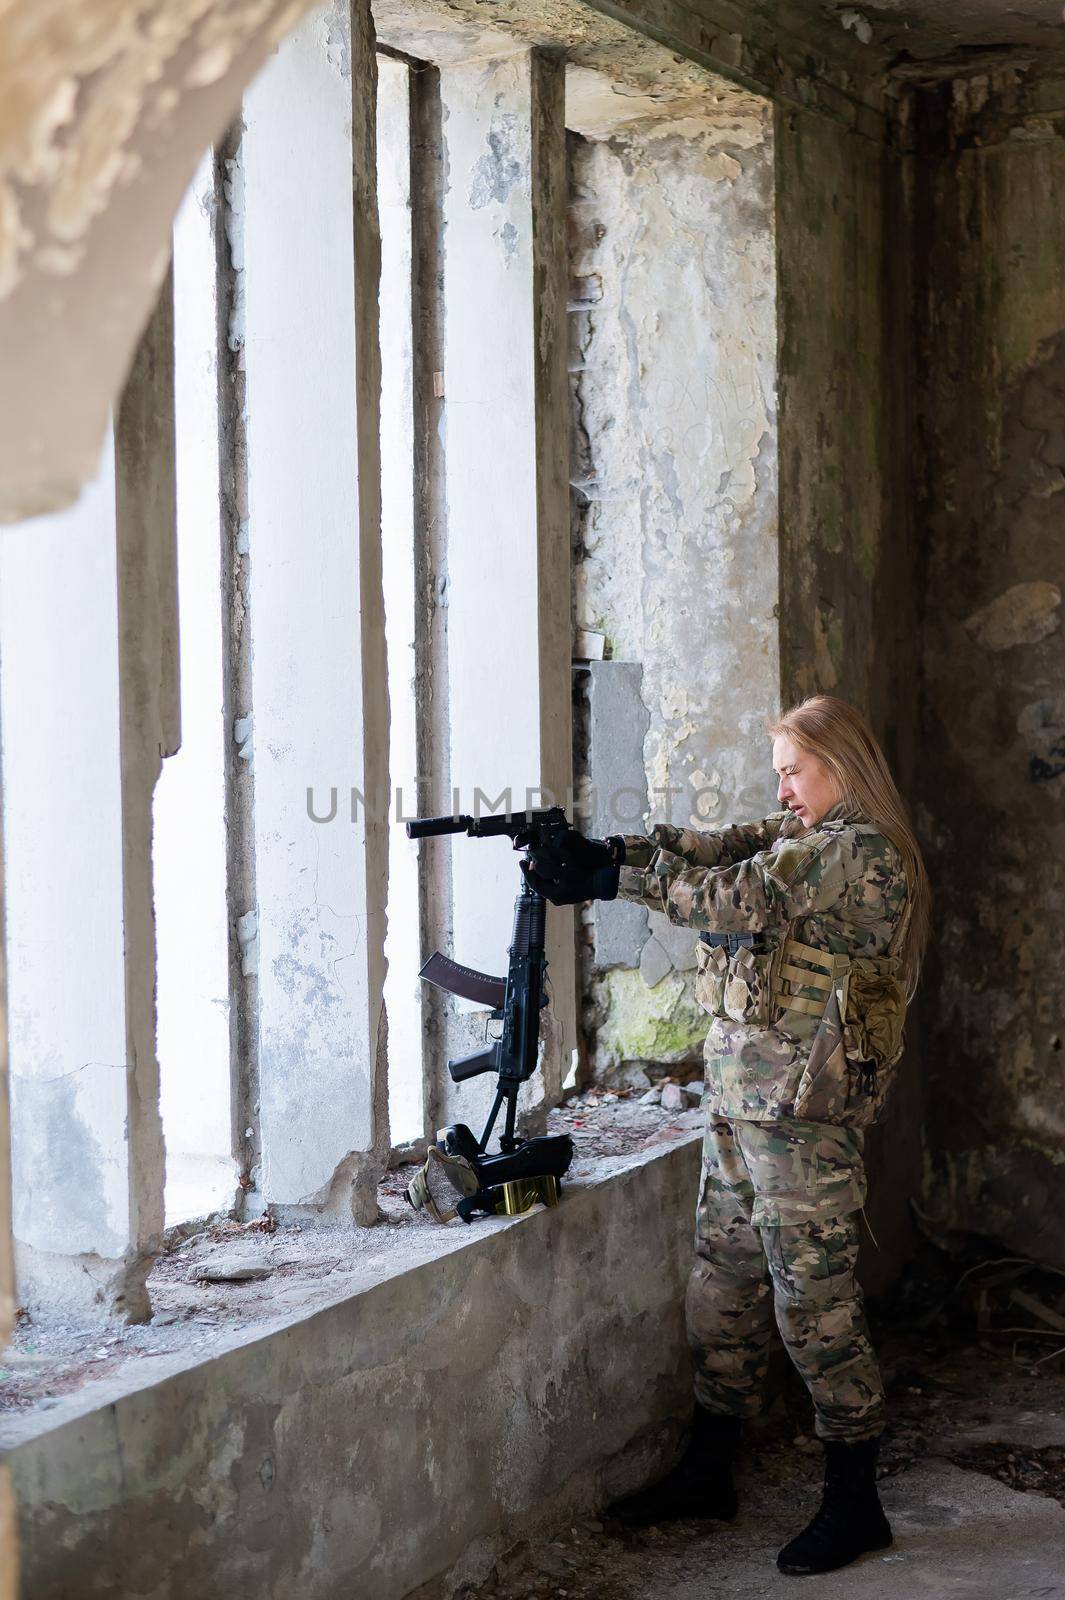 A woman in an army uniform aims to shoot a firearm in an abandoned building. by mrwed54